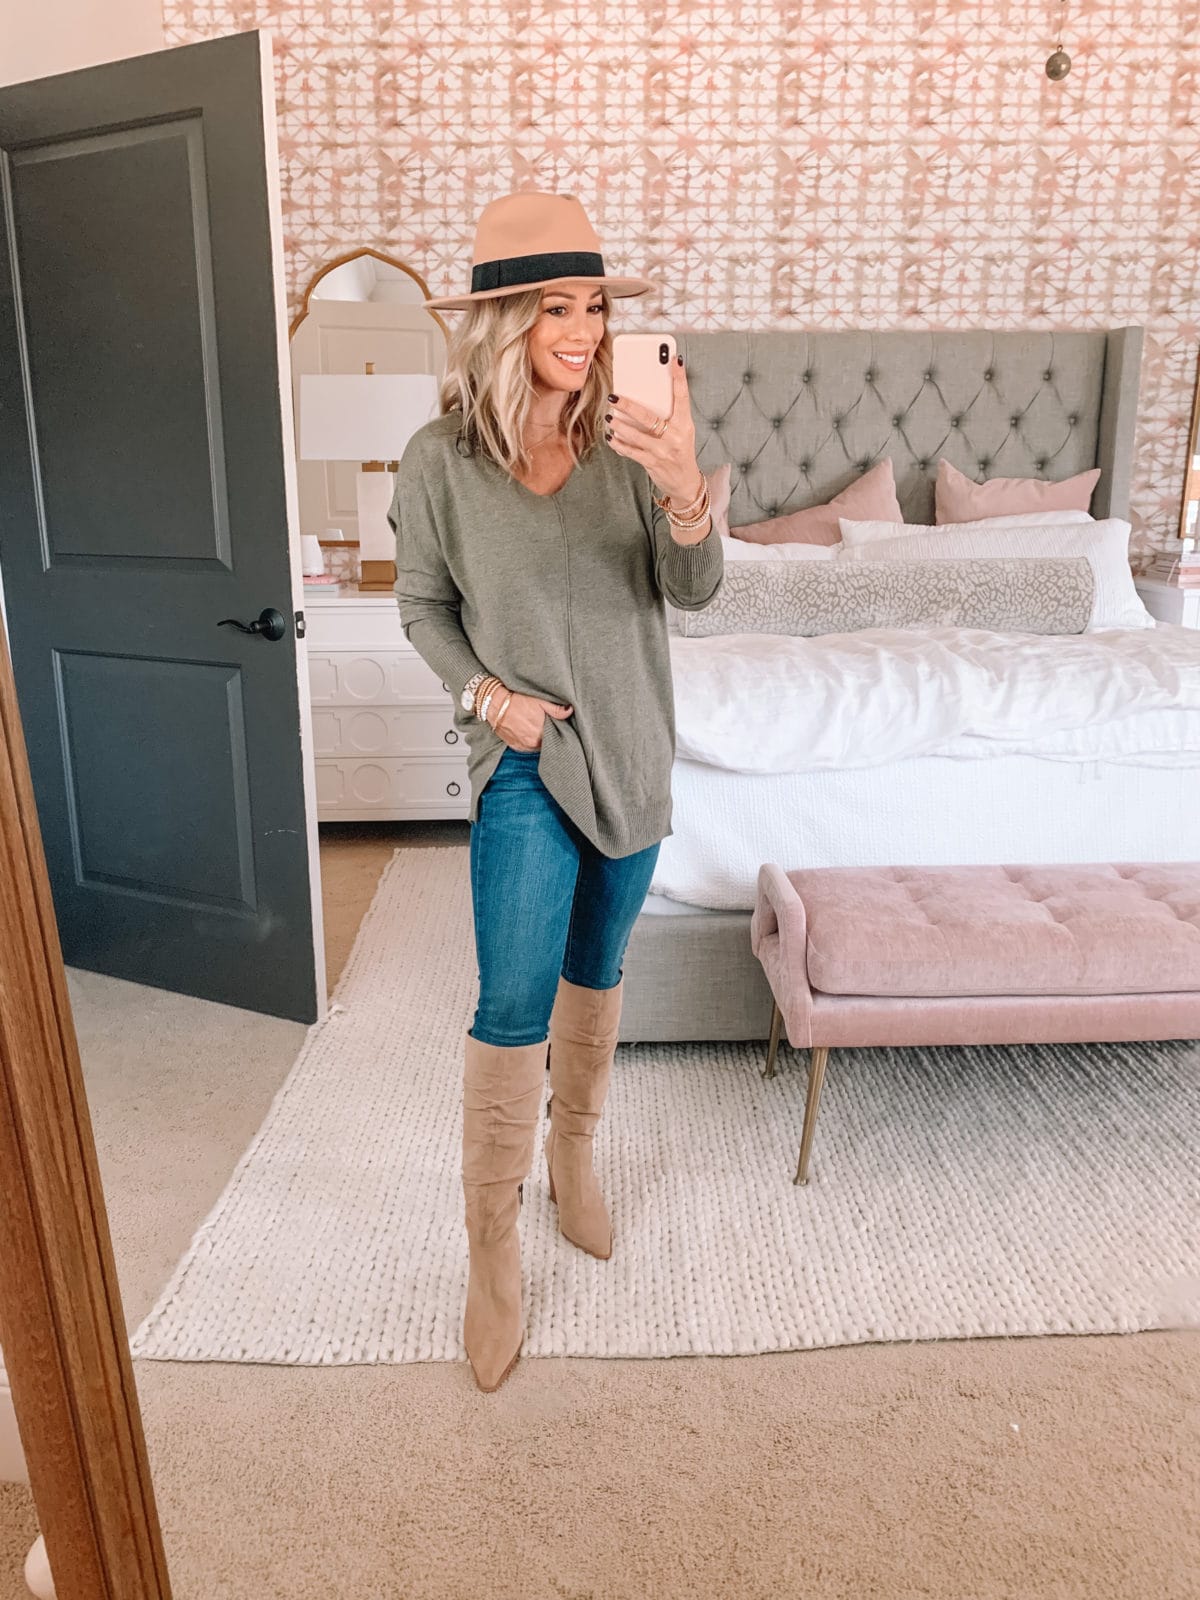 Amazon Fashion Faves, Sweater, Jeans, Knee High Boots, Hat